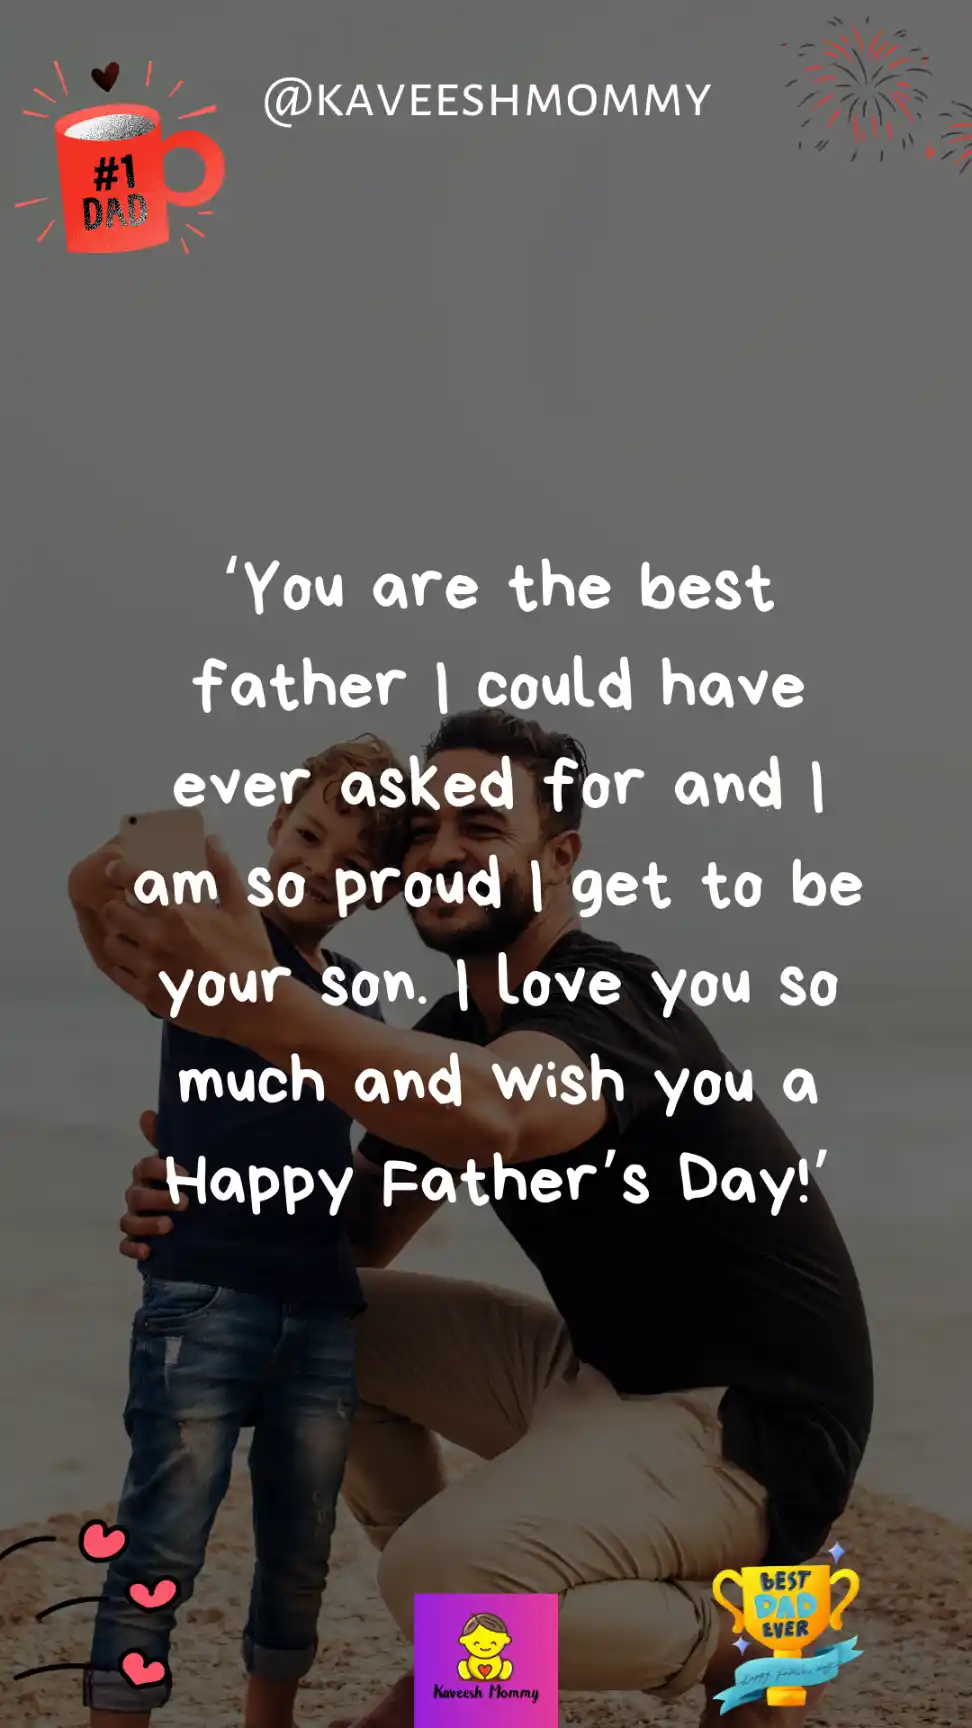 fathers day quotes to dad from son-You’re the dad every son wishes he had! Happy Father’s Day!’